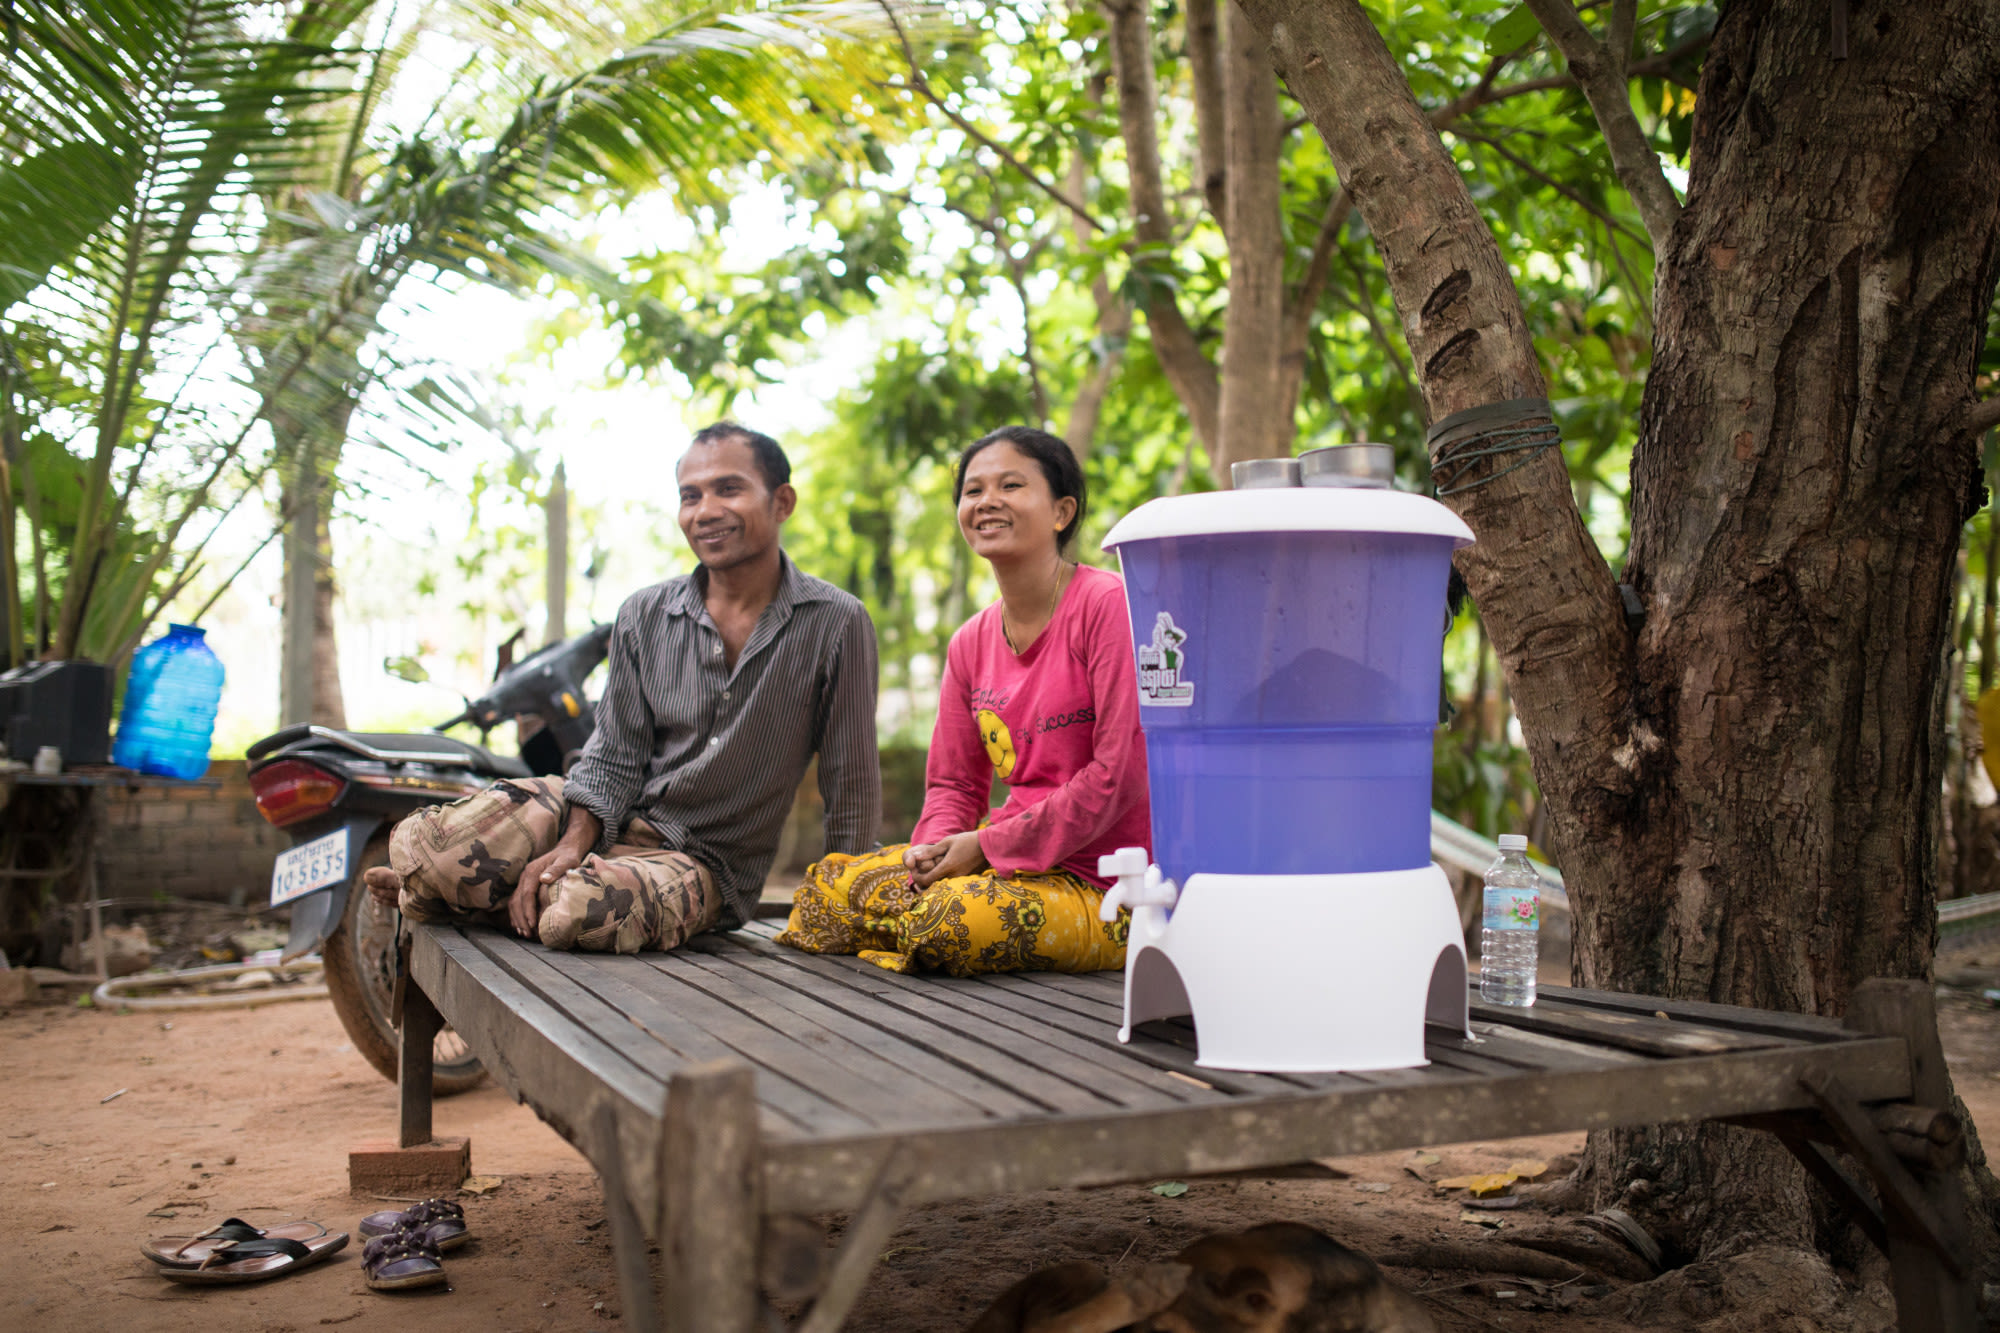 A $175 loan helped a member to buy a water filter to provide safe drinking water for their family.
